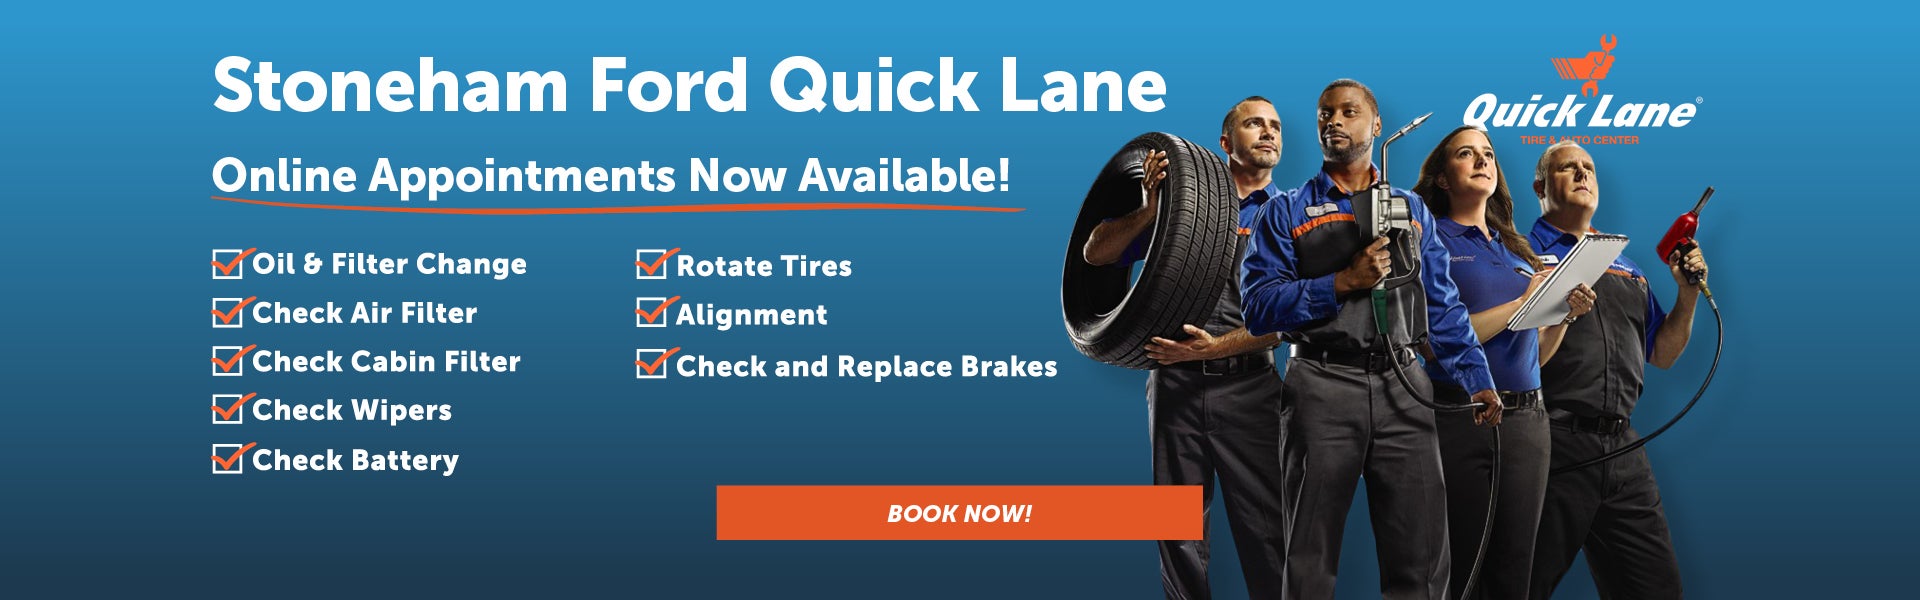 Stoneham Ford Quick Lane Online Appointments